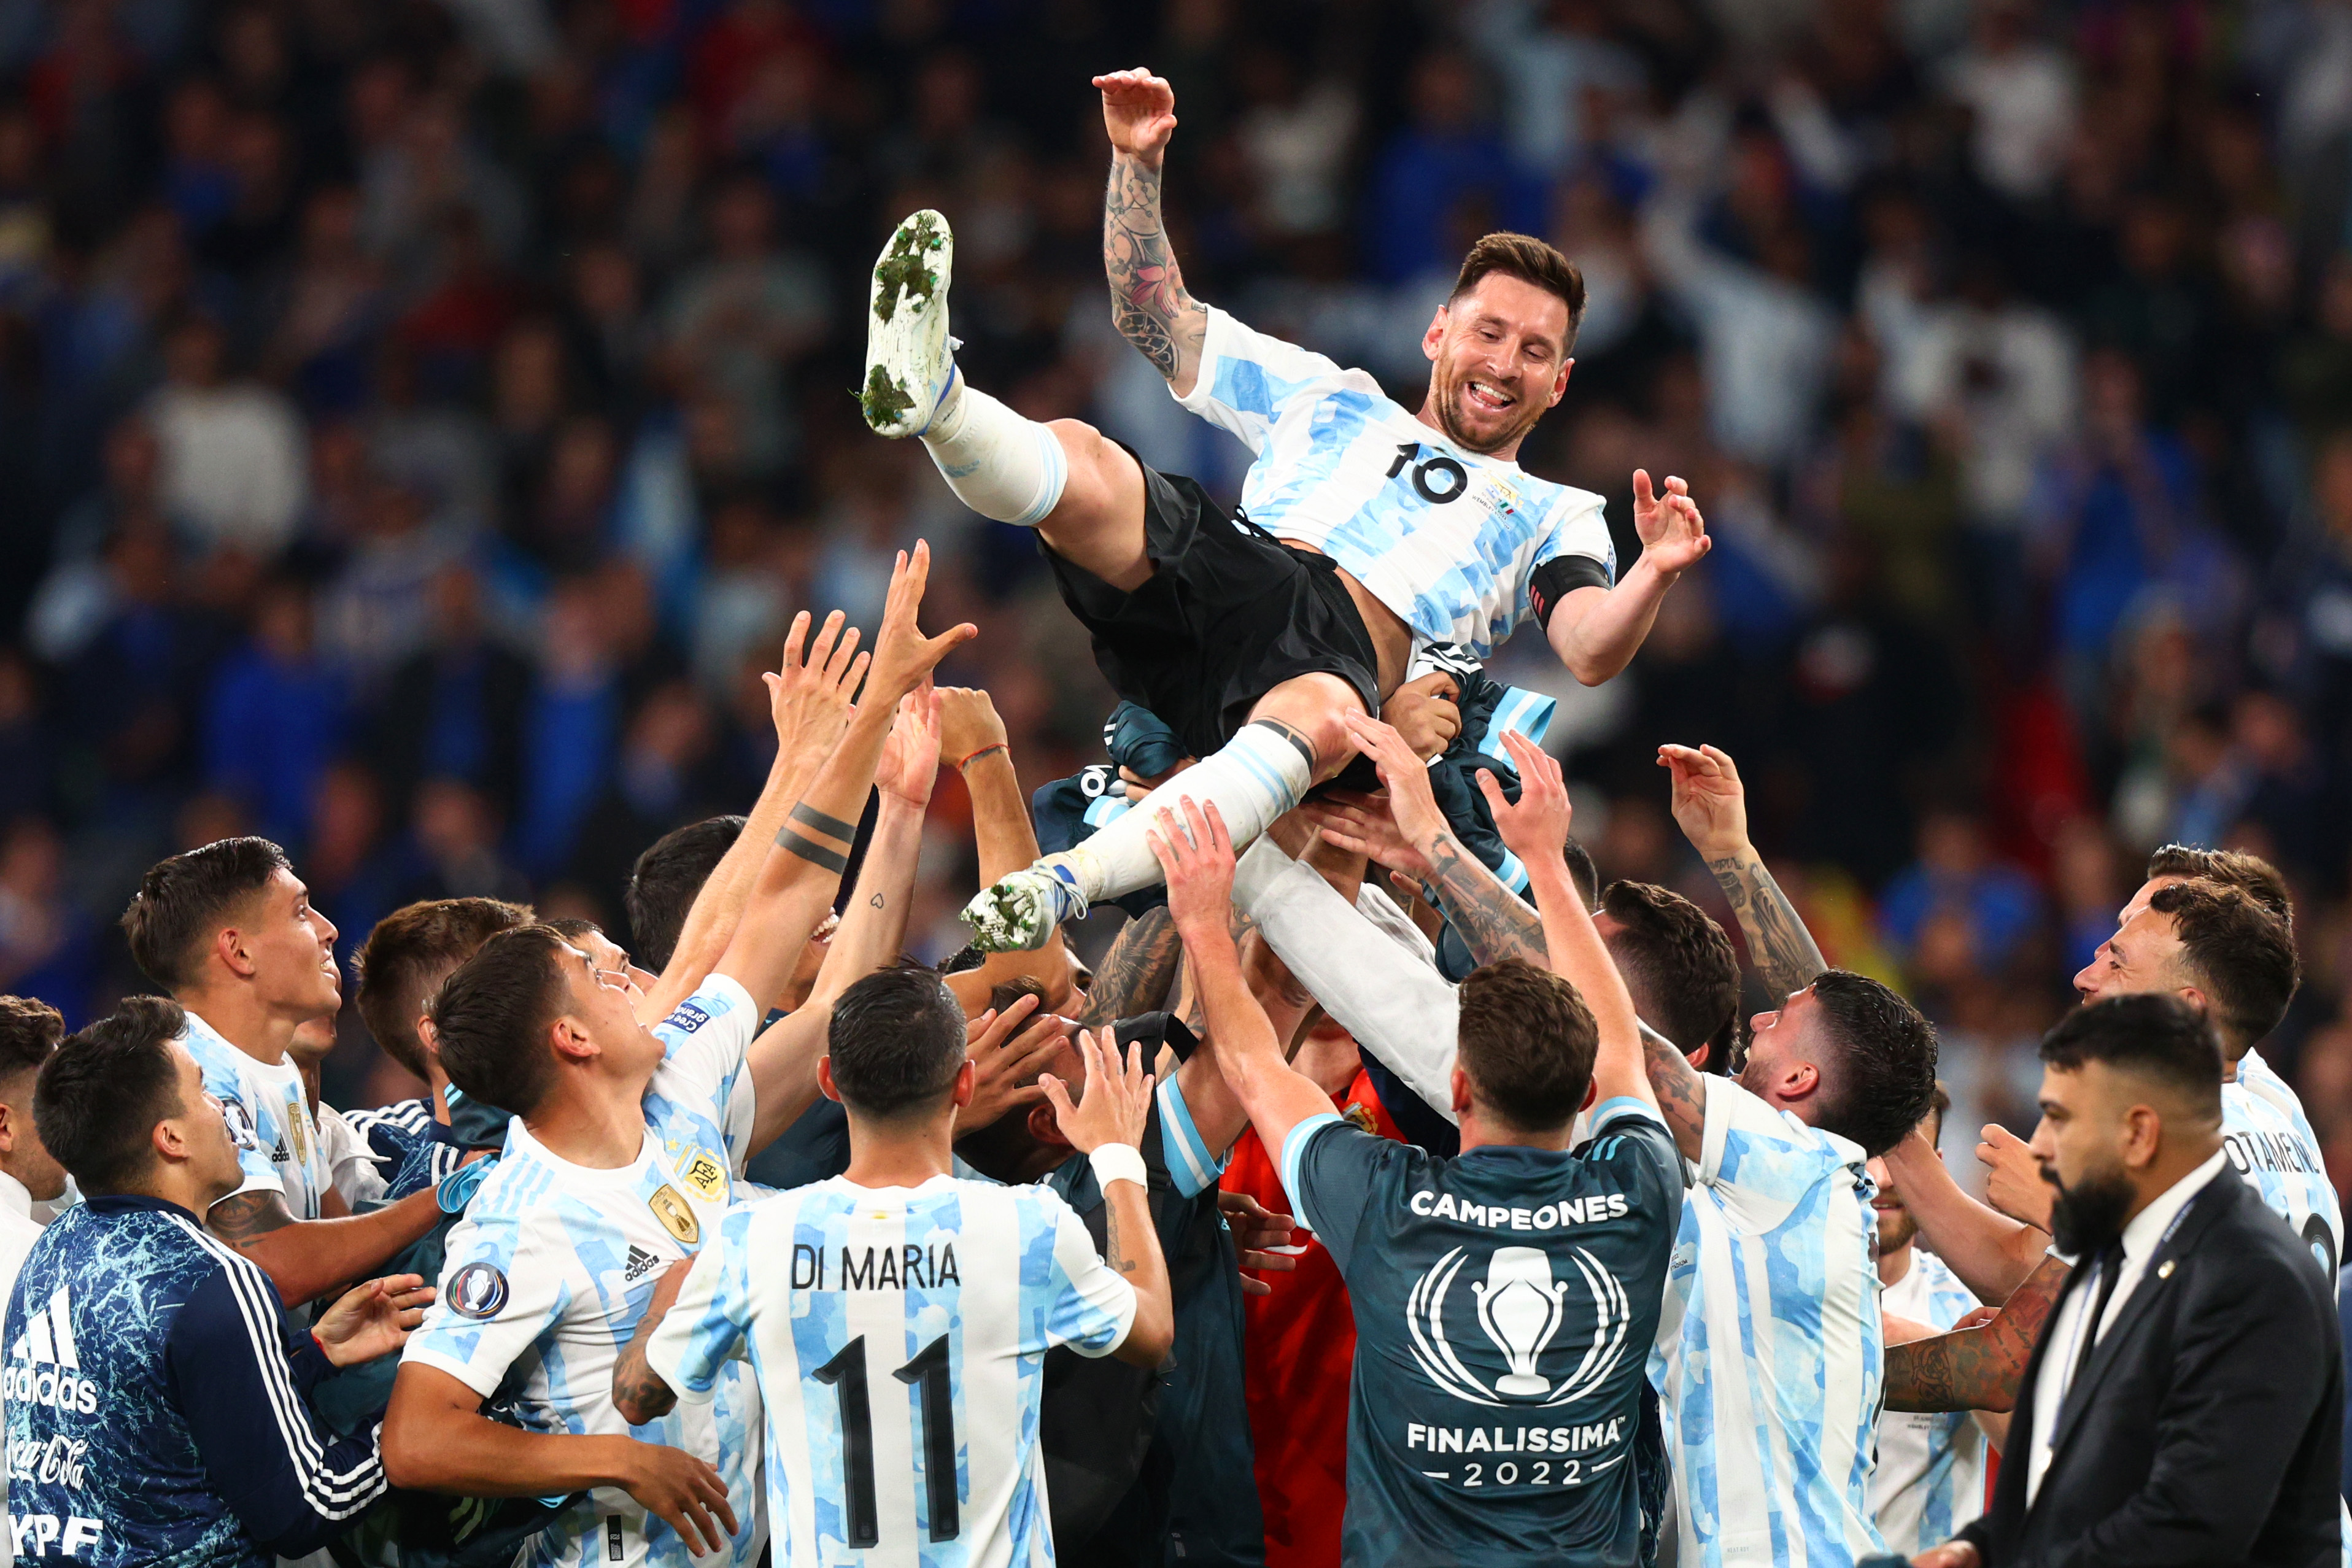 Finalissima 2022: Argentina beat Italy to win first-ever Finalissima at Wembley, Lionel Messi, Di Maria and Dybala star in 3-0 thrashing, Watch Argentina beat Italy HIGHLIGHTS